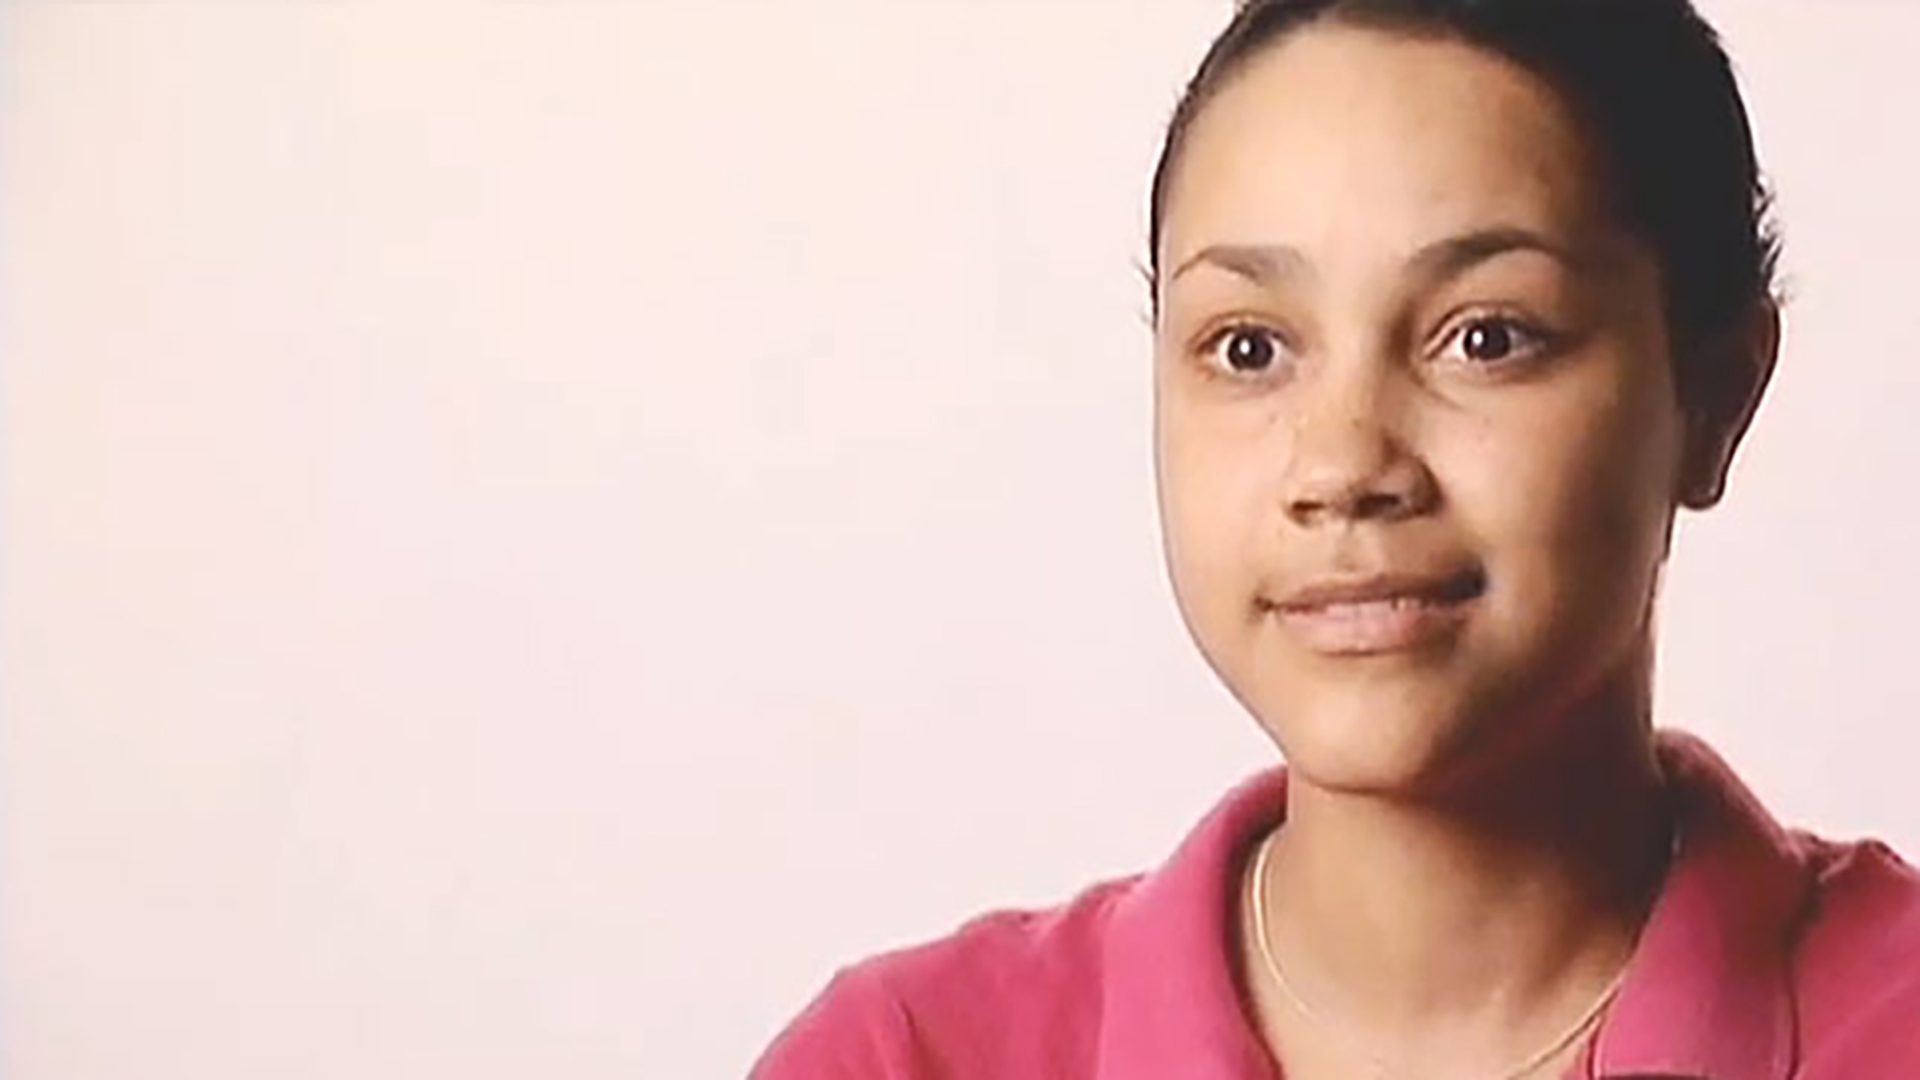 A young woman wearing a pink polo shirt being interviewed